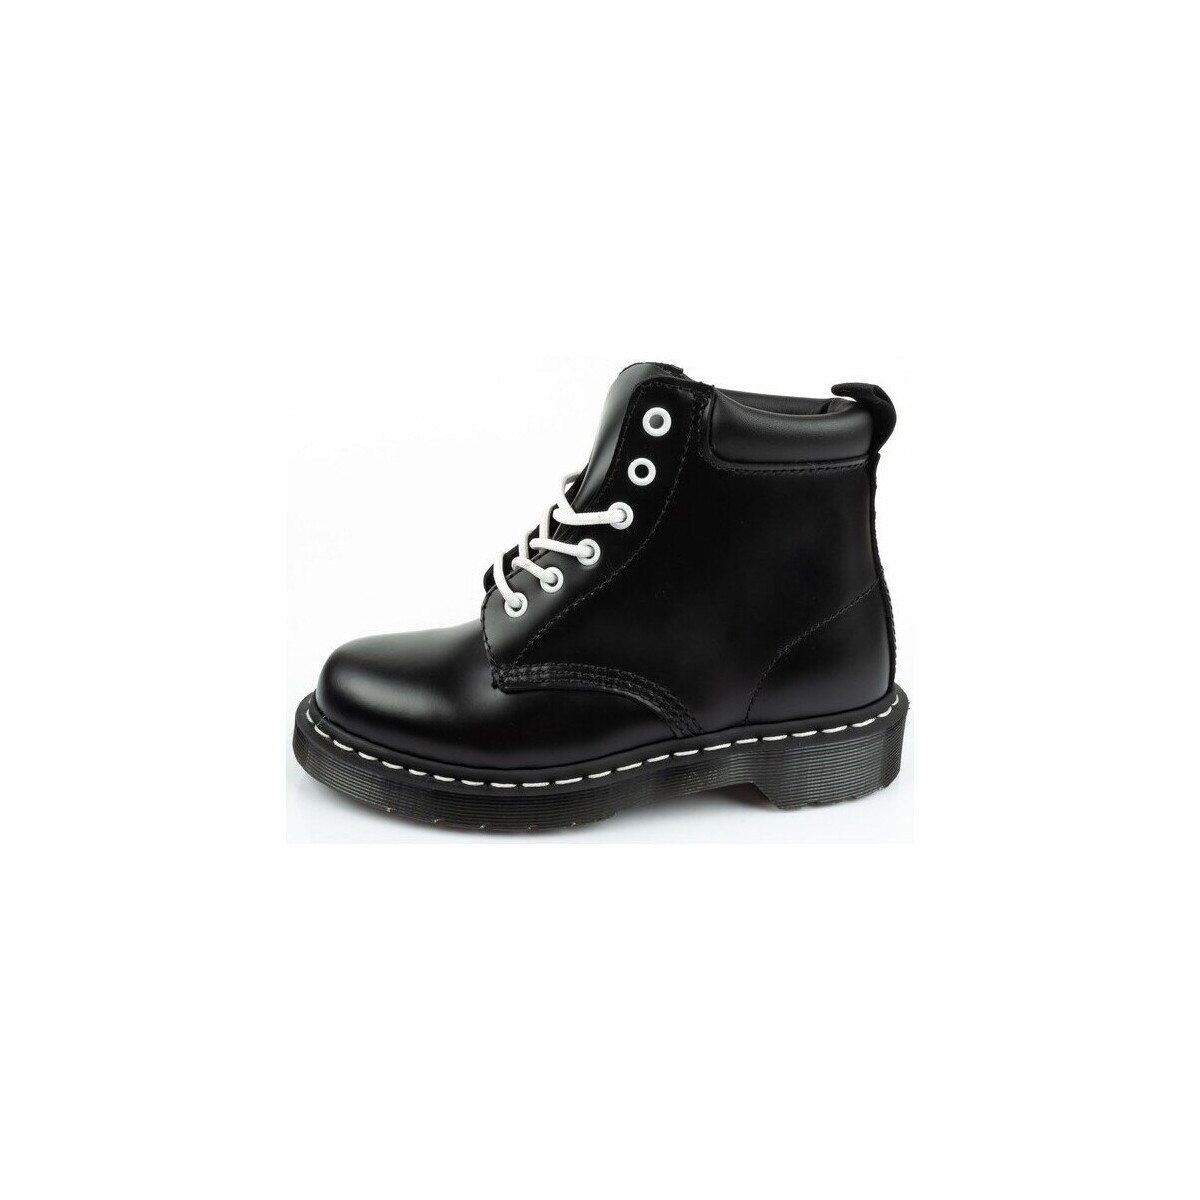 Dr Martens boots. Search our vast range of Dr Martens boots and shoes.